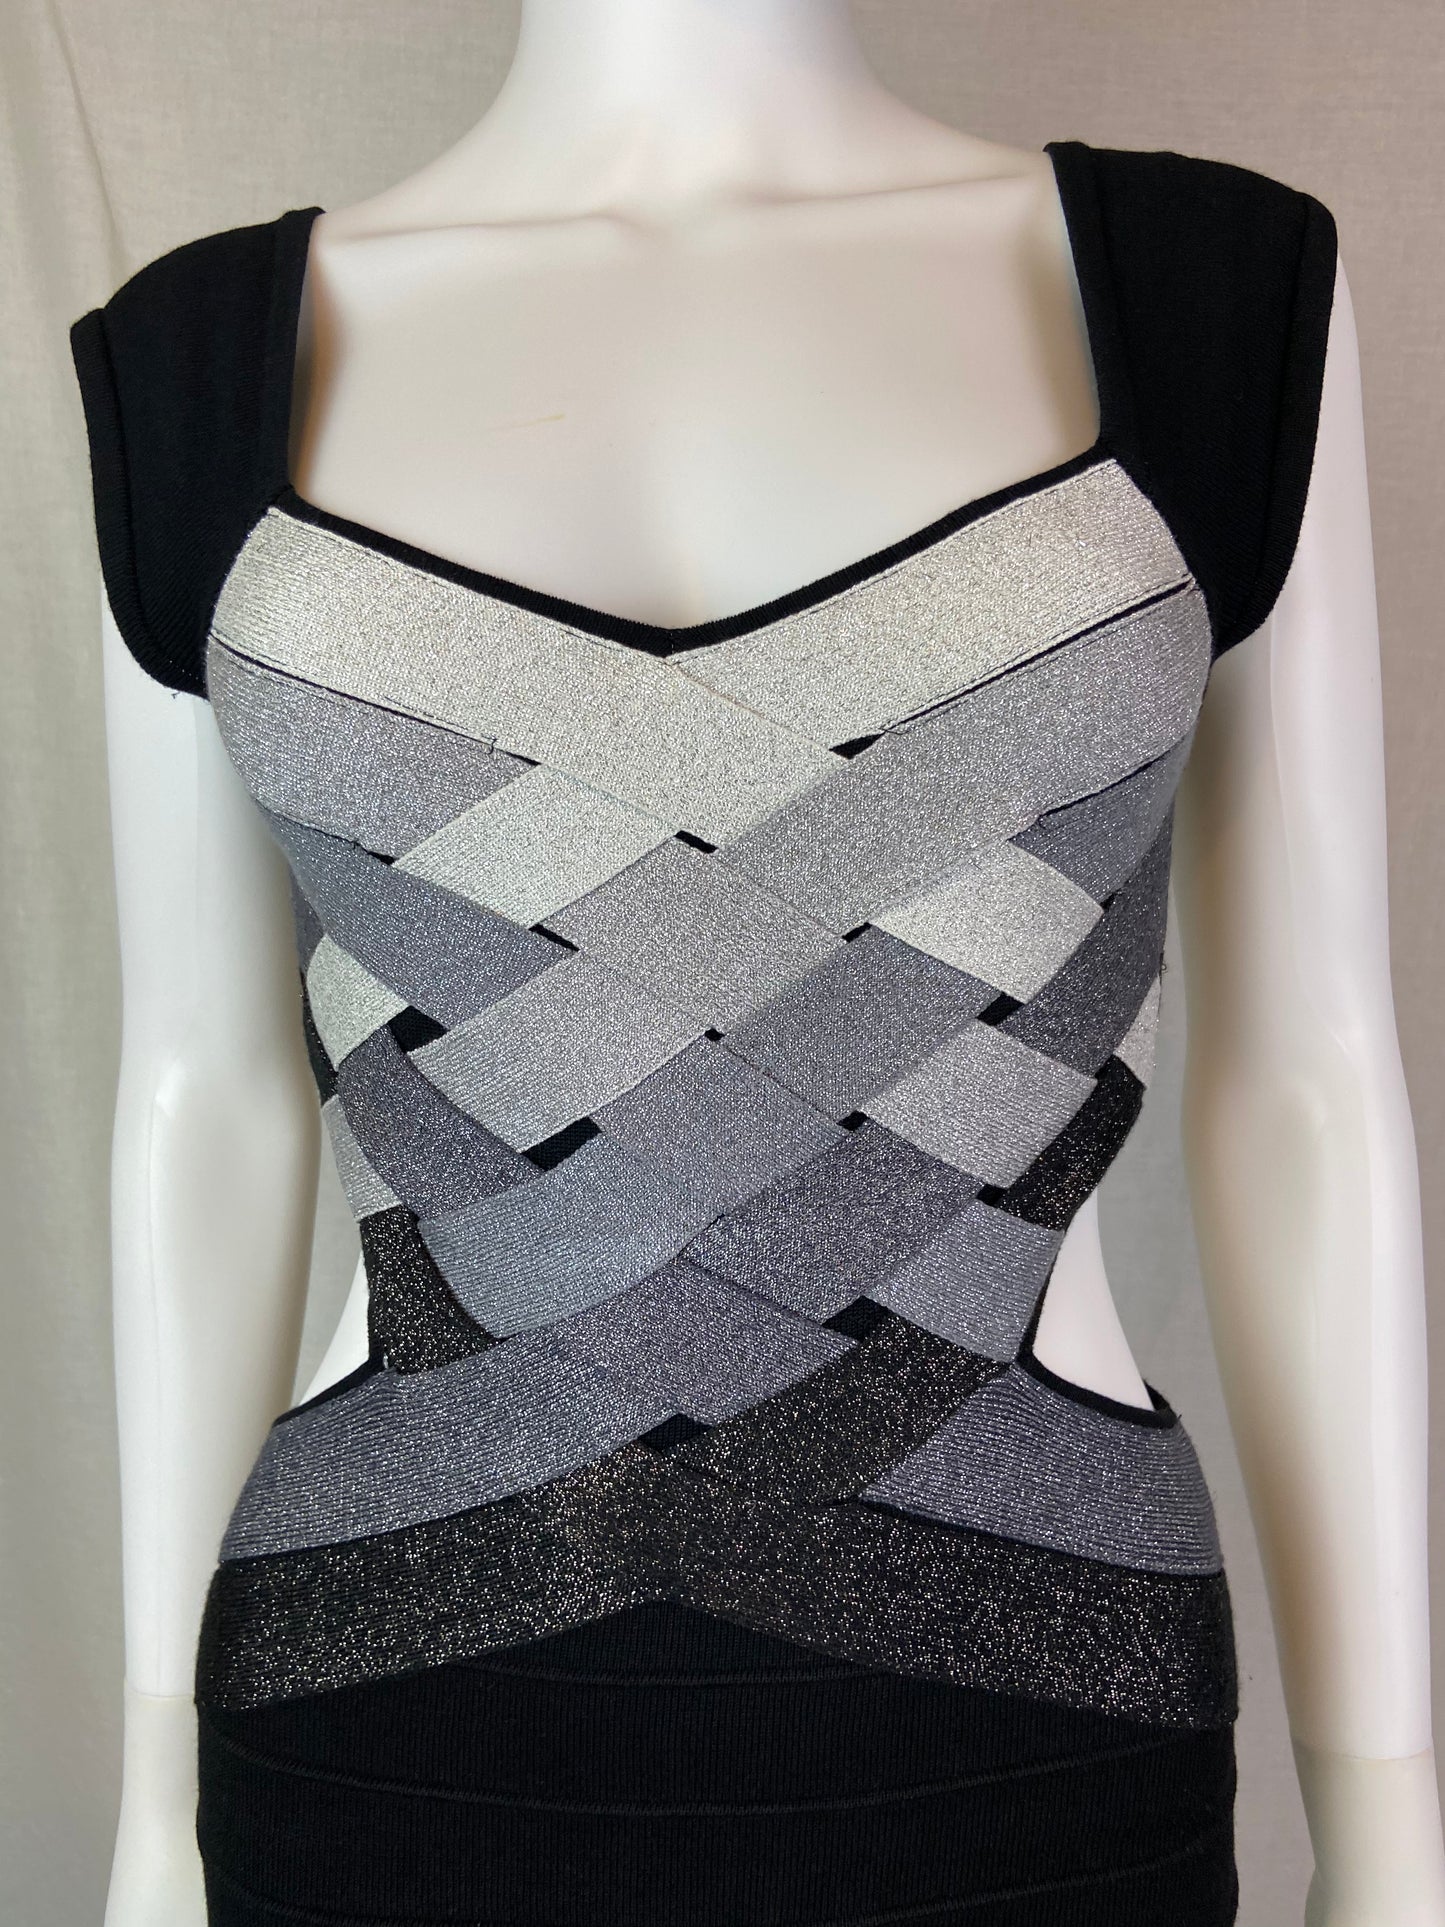 Wow Couture Black Silver Gray Glitter Cut Out Bandage Dress